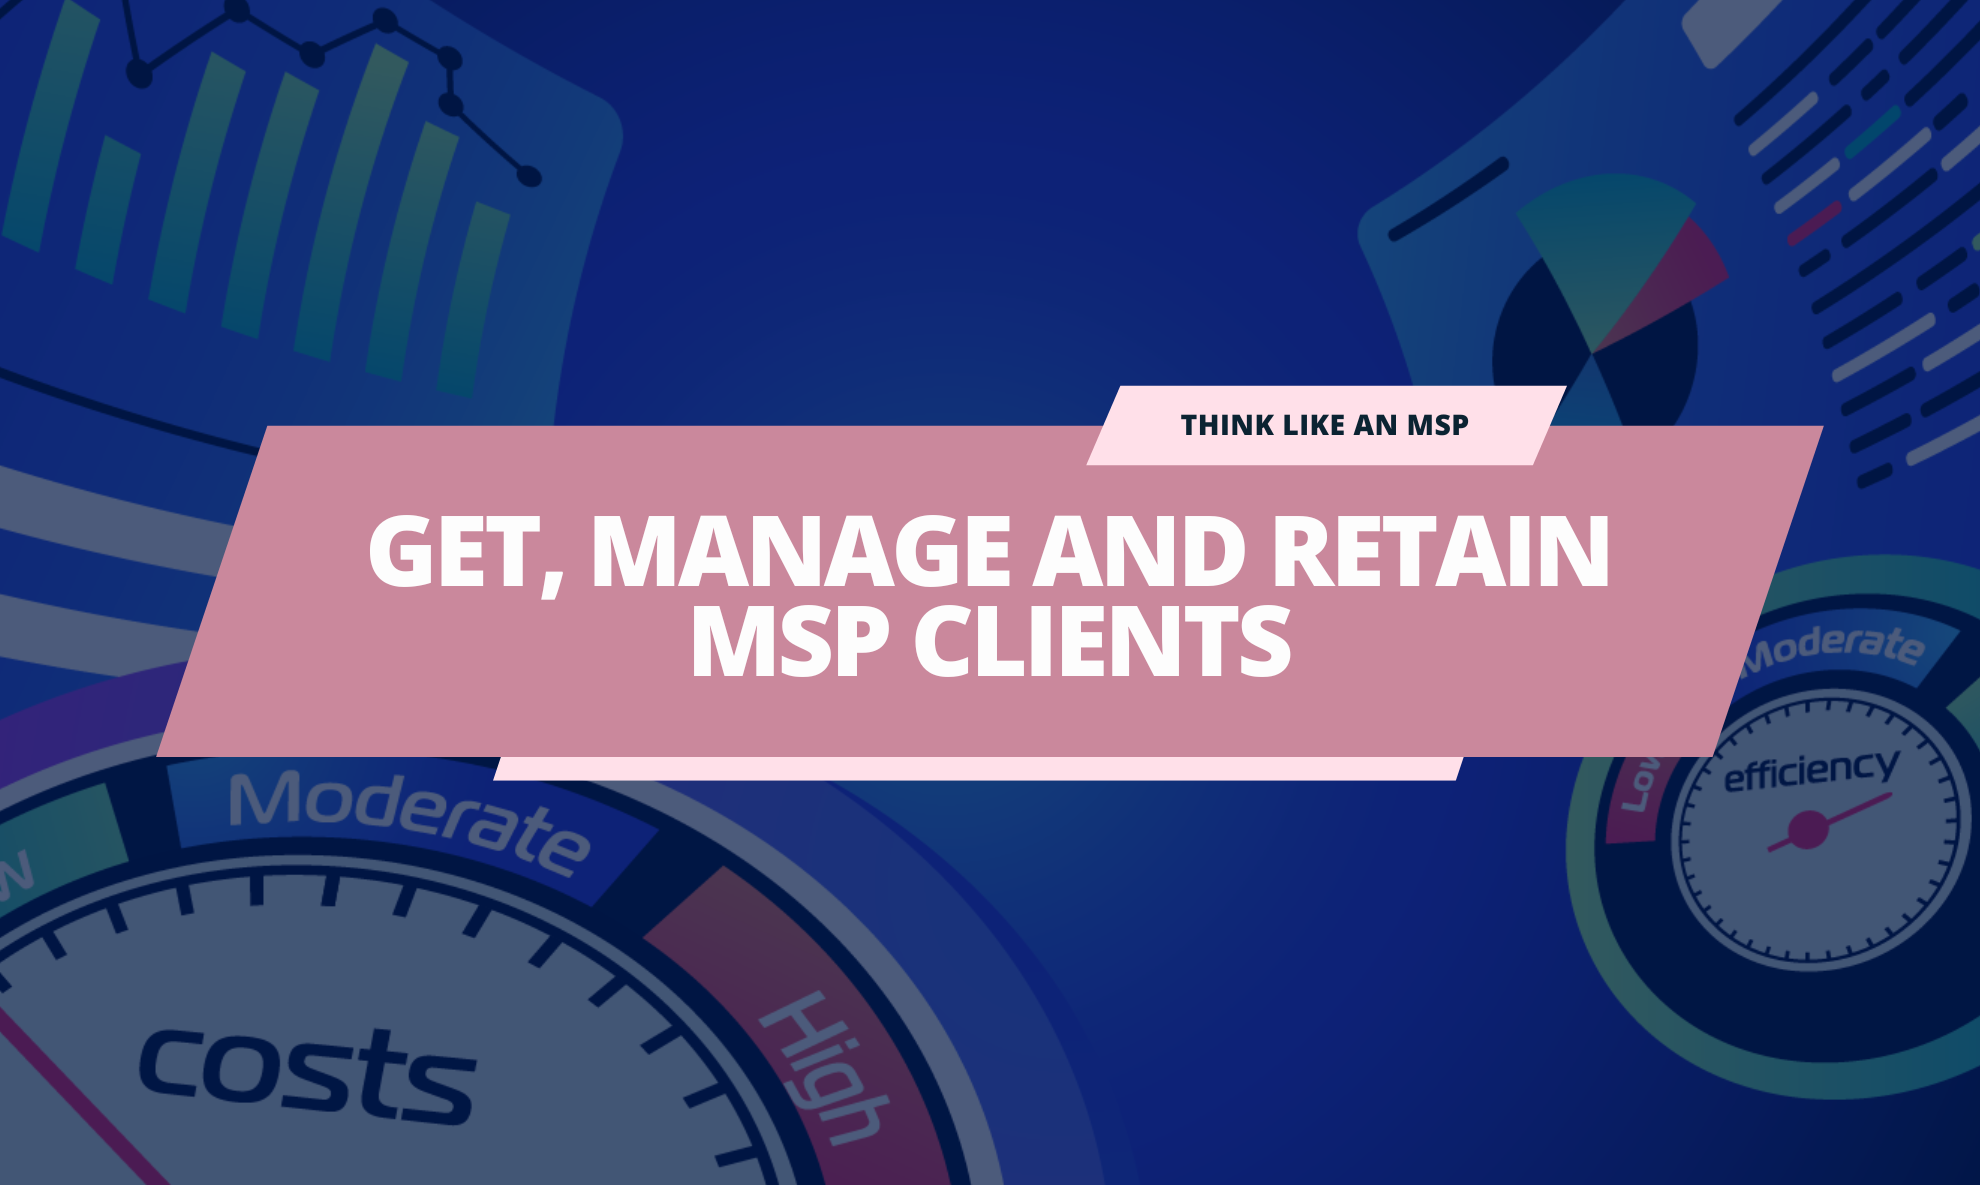 Top 10 Tips to Get, Manage and Retain MSP Clients